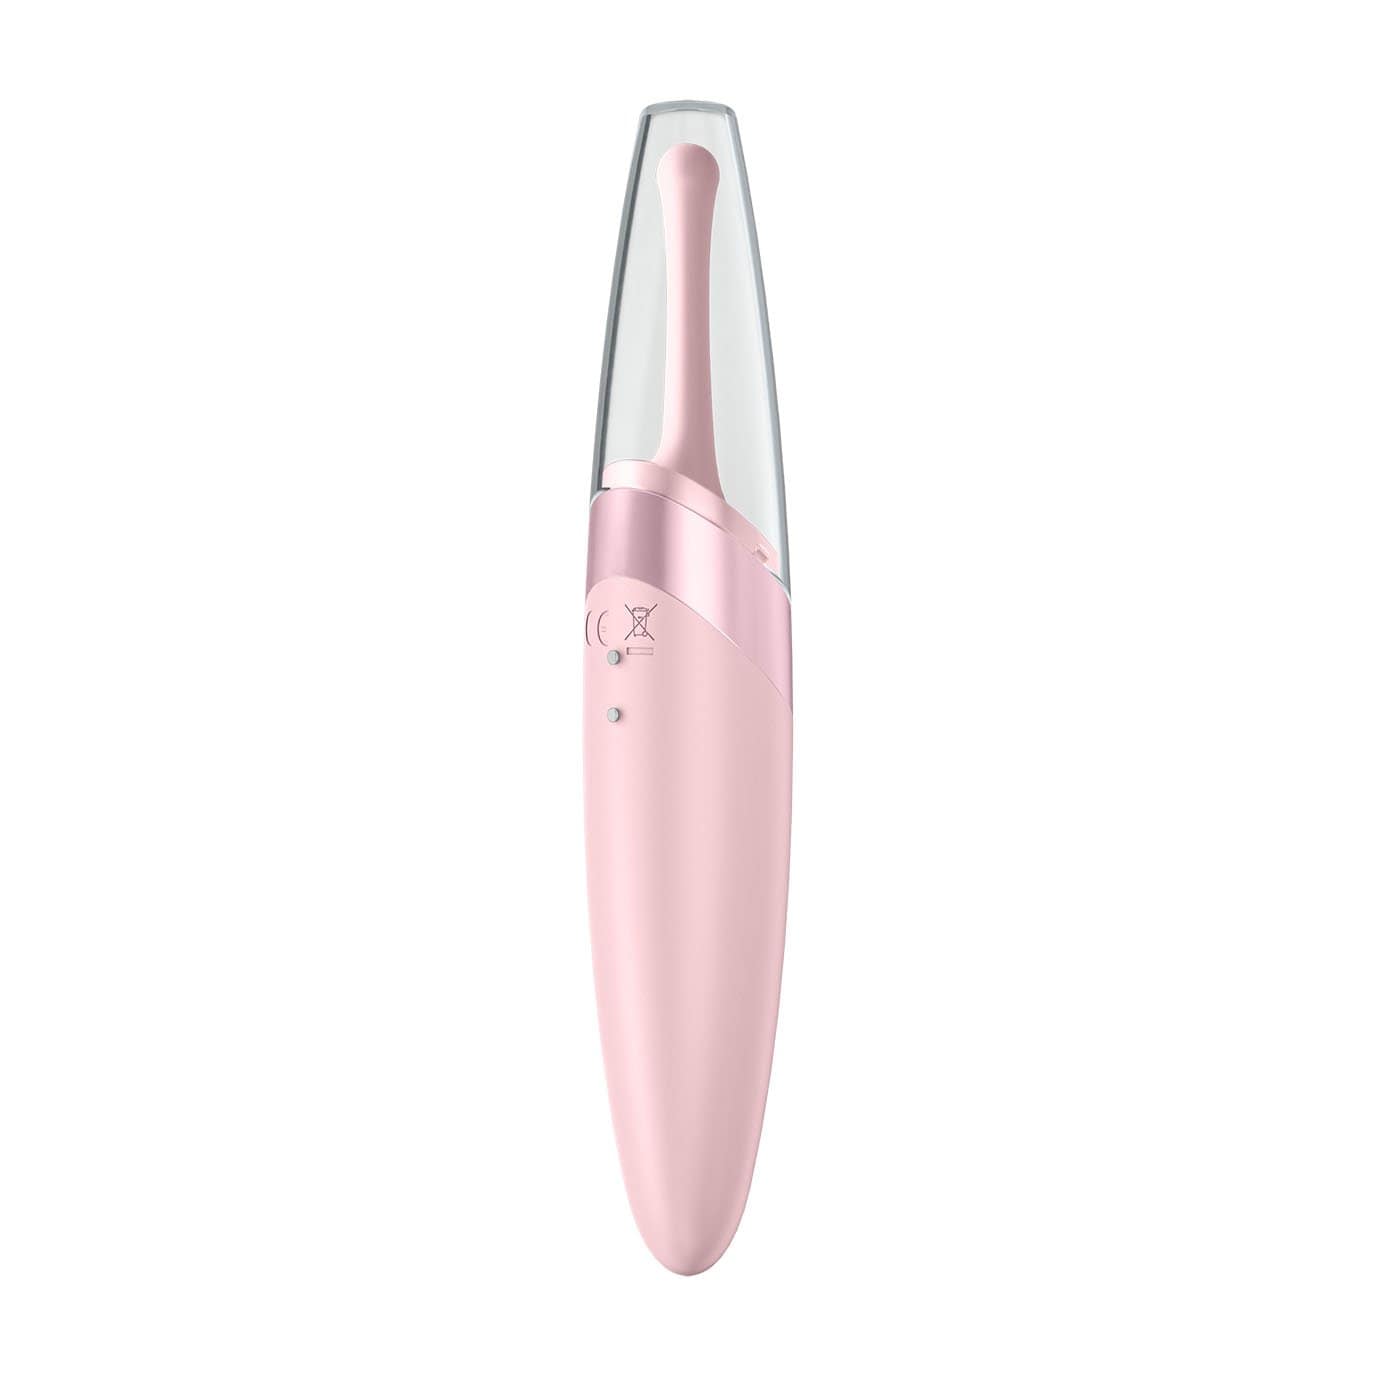 Satisfyer - Twirling Delight Precise Clit Massger (Berry) Clit Massager (Vibration) Rechargeable 4061504009704 CherryAffairs